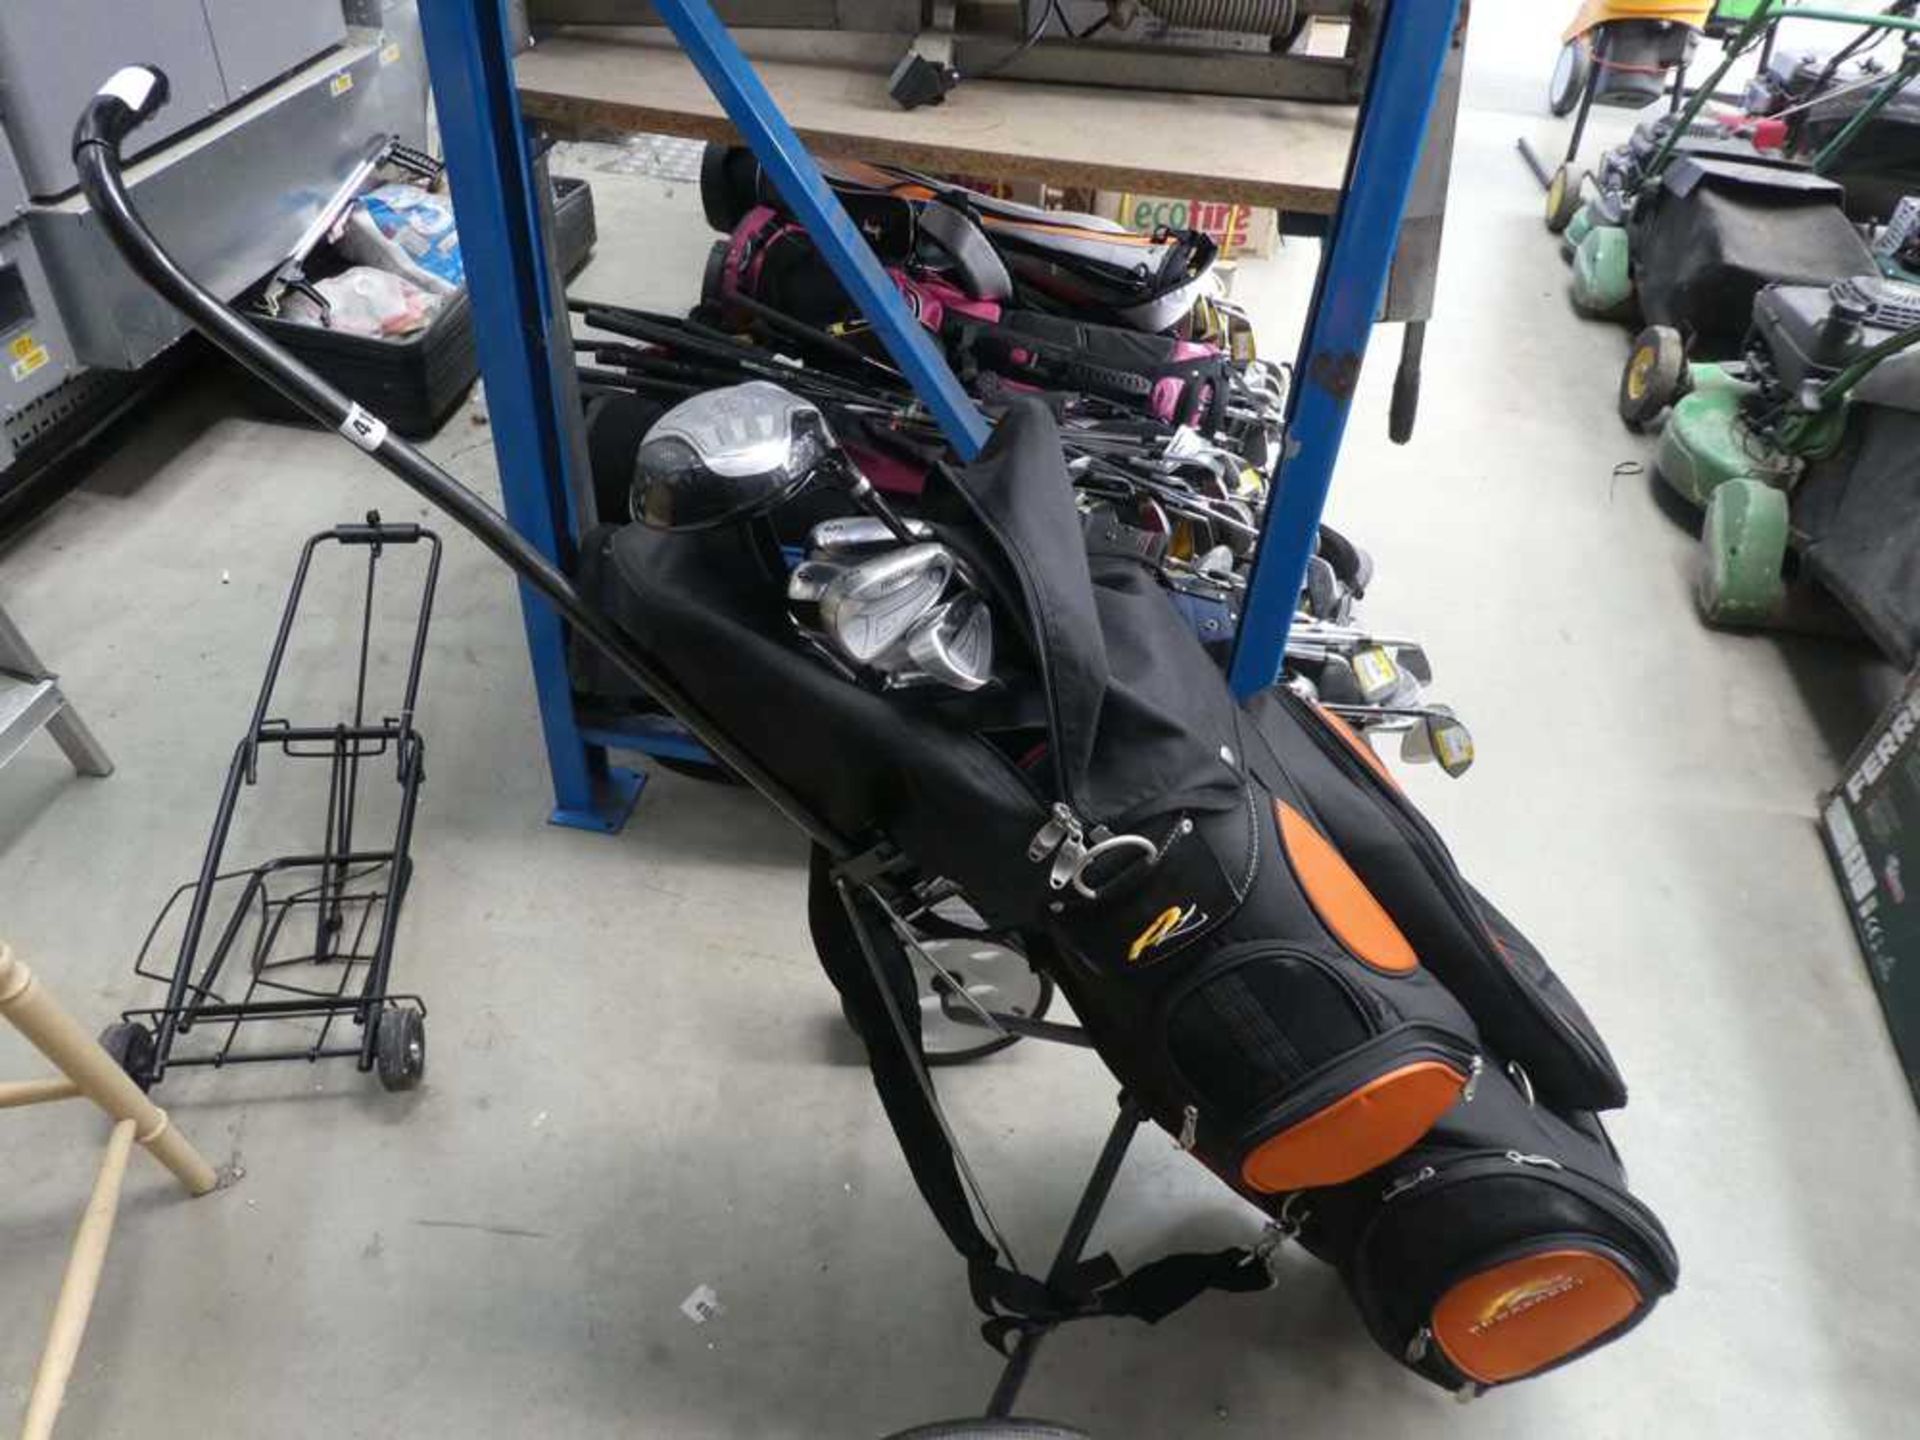 Power caddy orange and black golf bag and a qty of Mizuno and Dunlop clubs